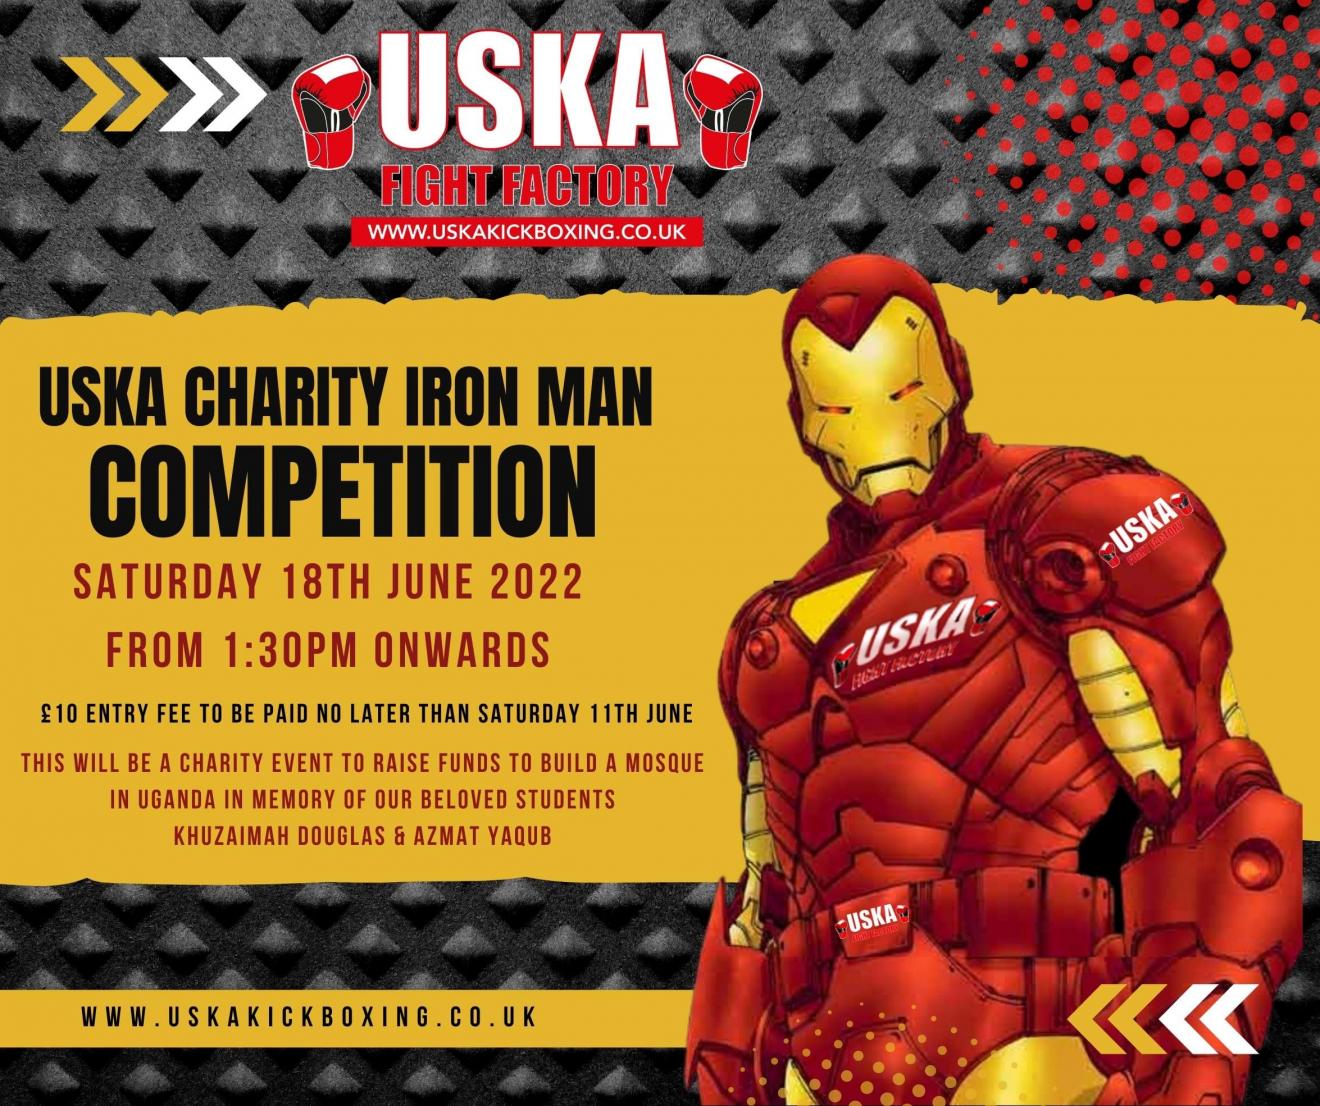 31-05-22 - Our Next Charity Iron Man Competition... All Welcome!